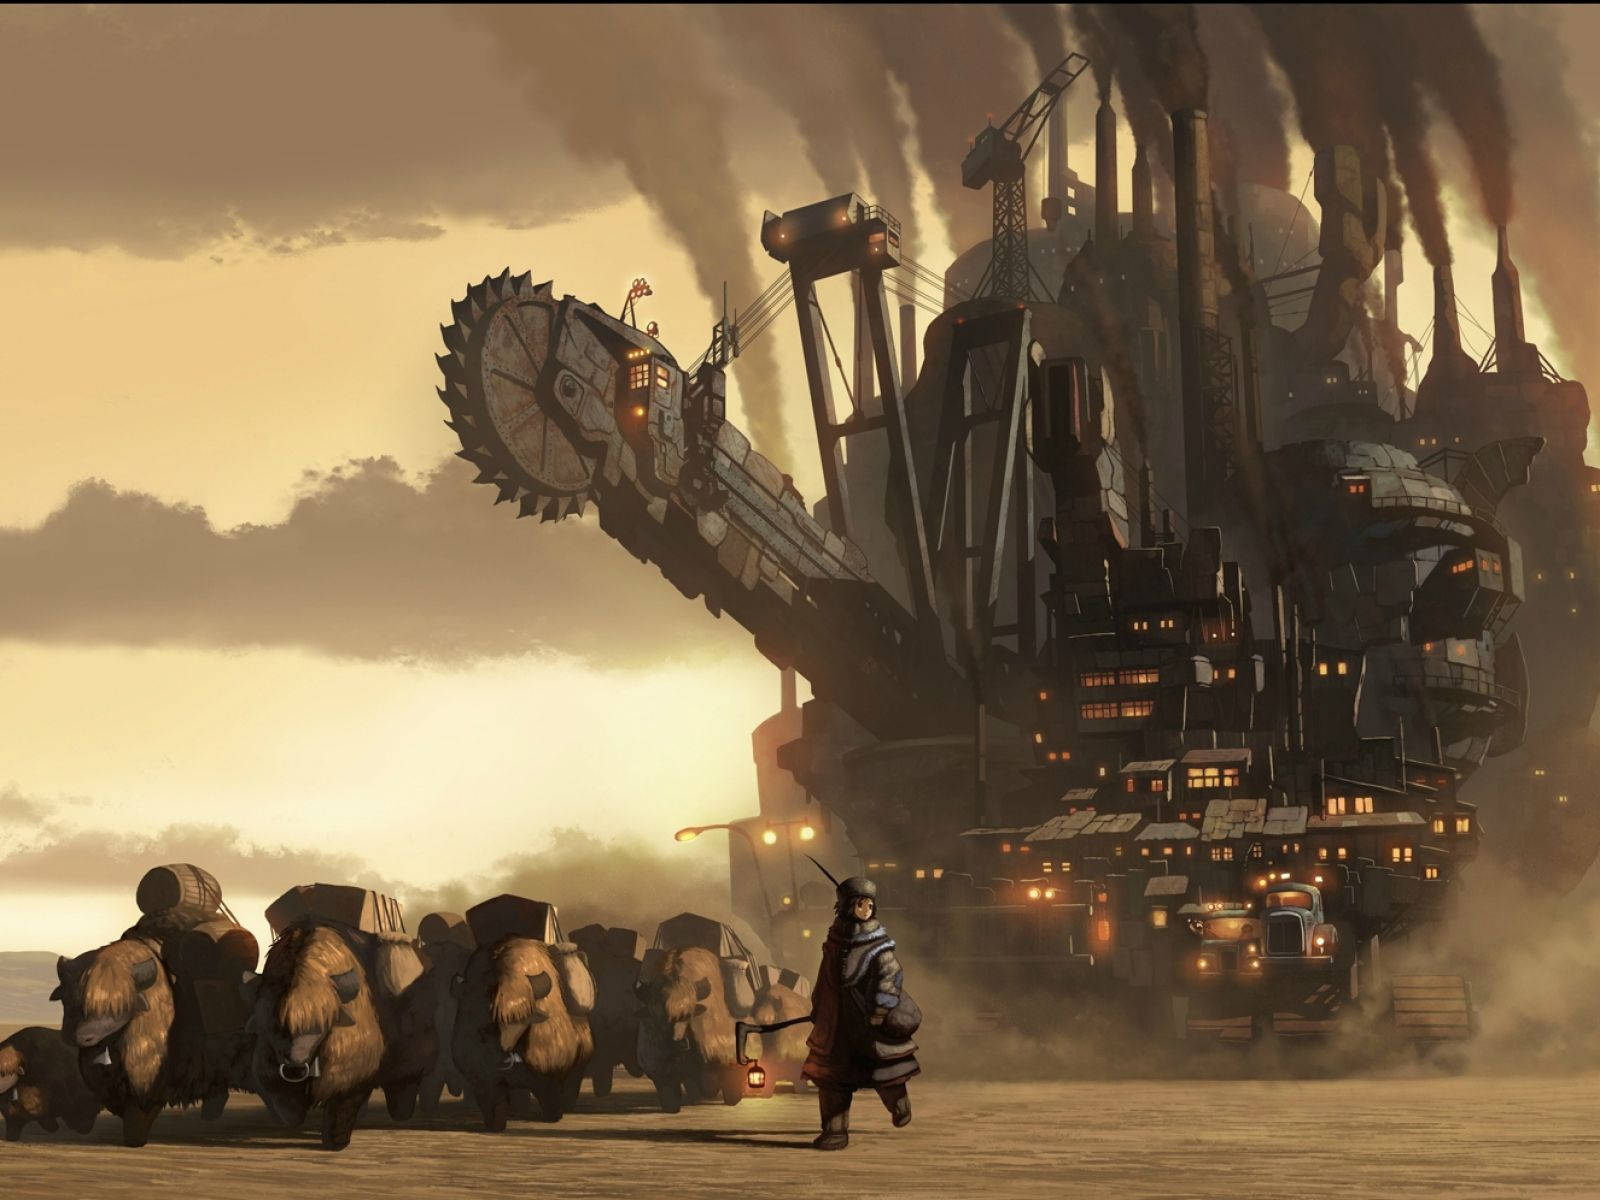 A steampunk-inspired illustration of an airship travelling over a desert Wallpaper